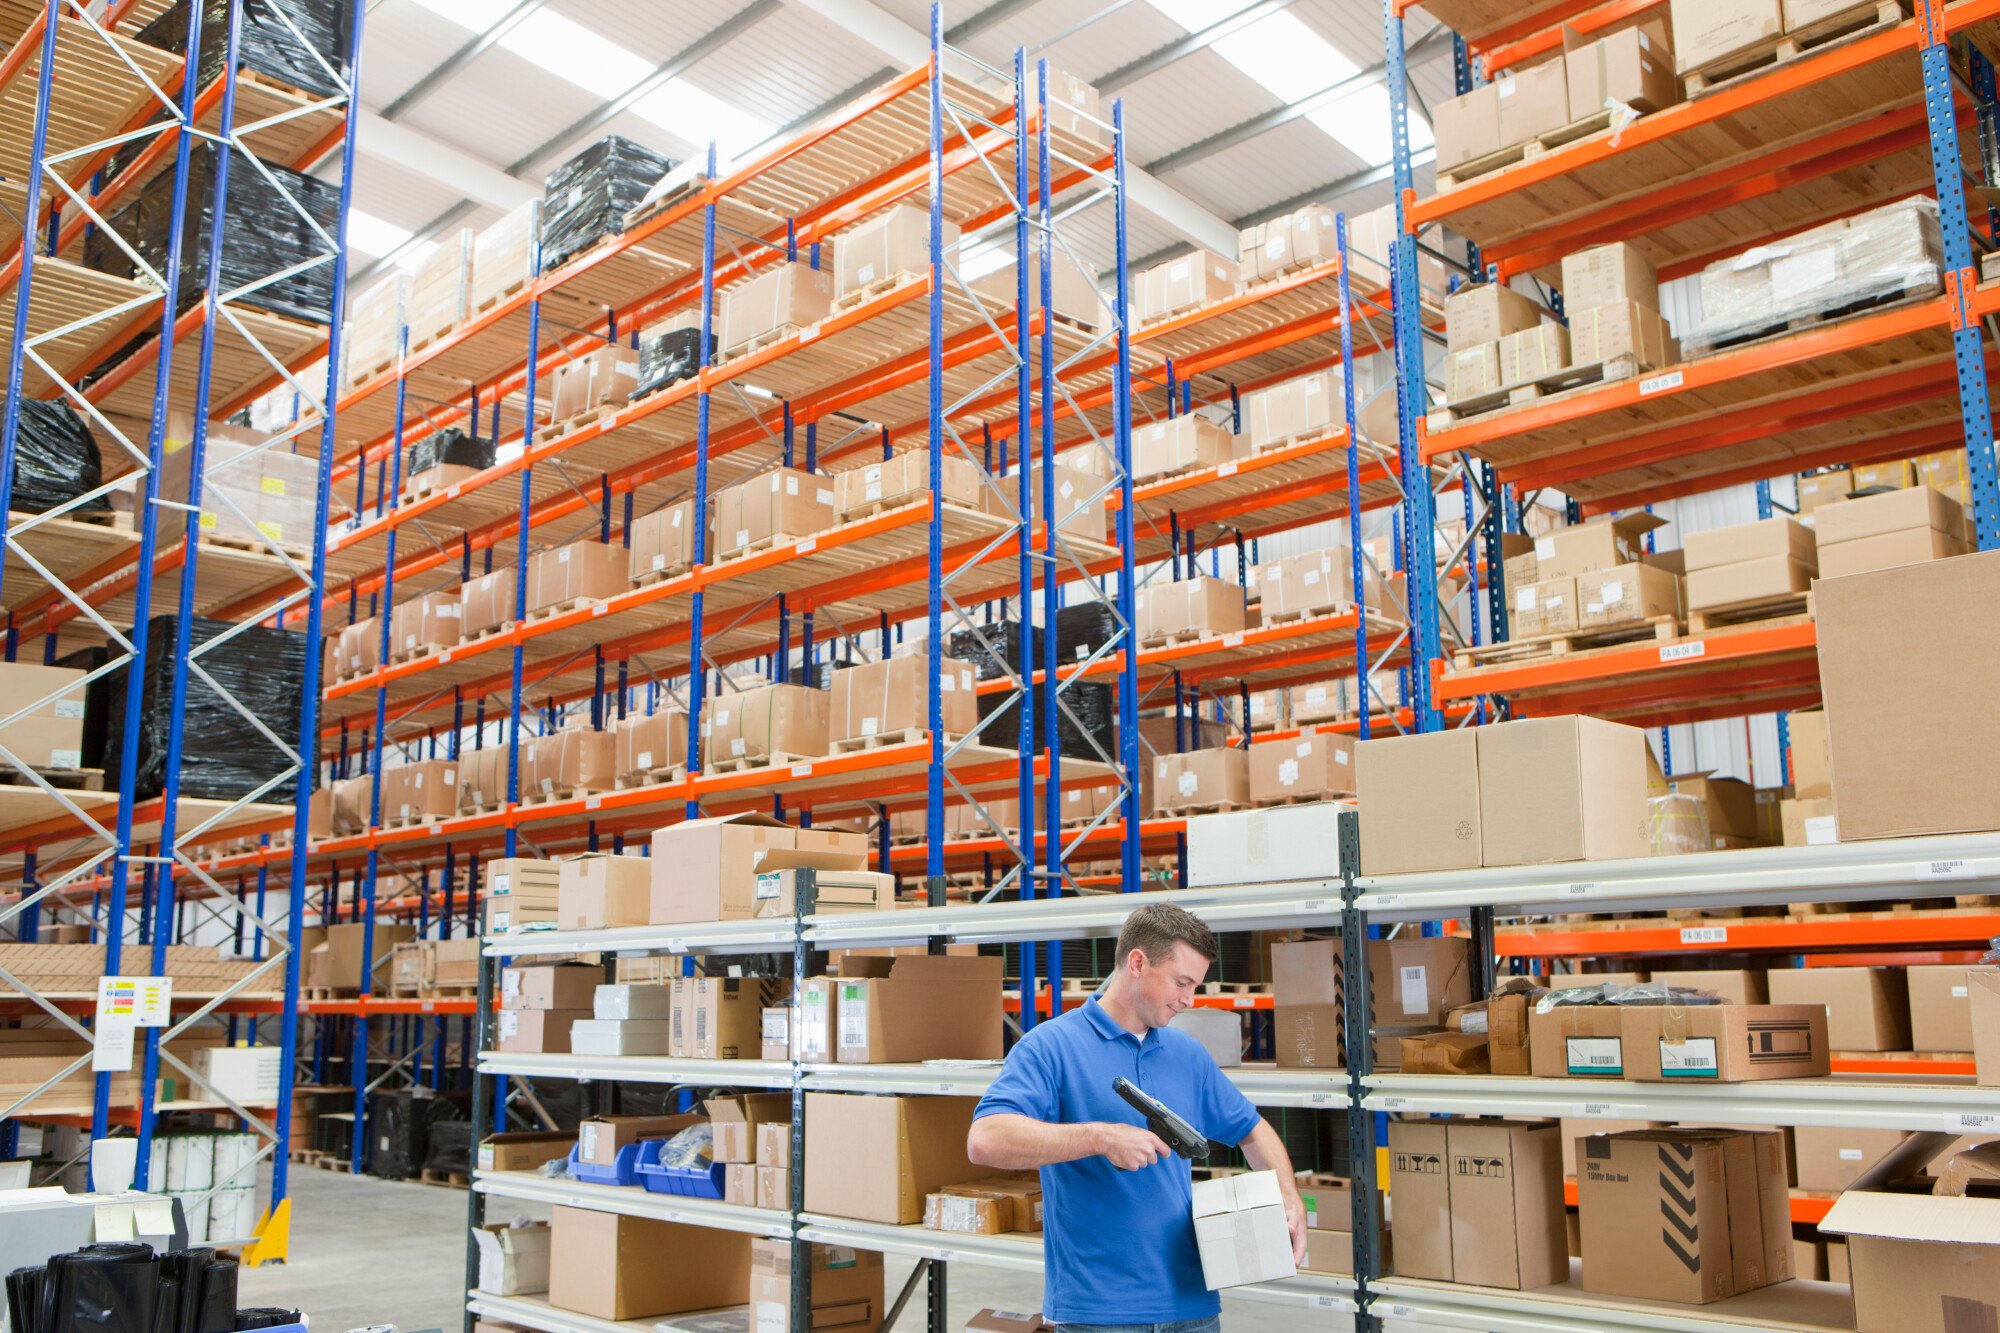 Whether you have a small office or a large warehouse, safety is always important. Here's a quick look at the most essential warehouse safety tips.